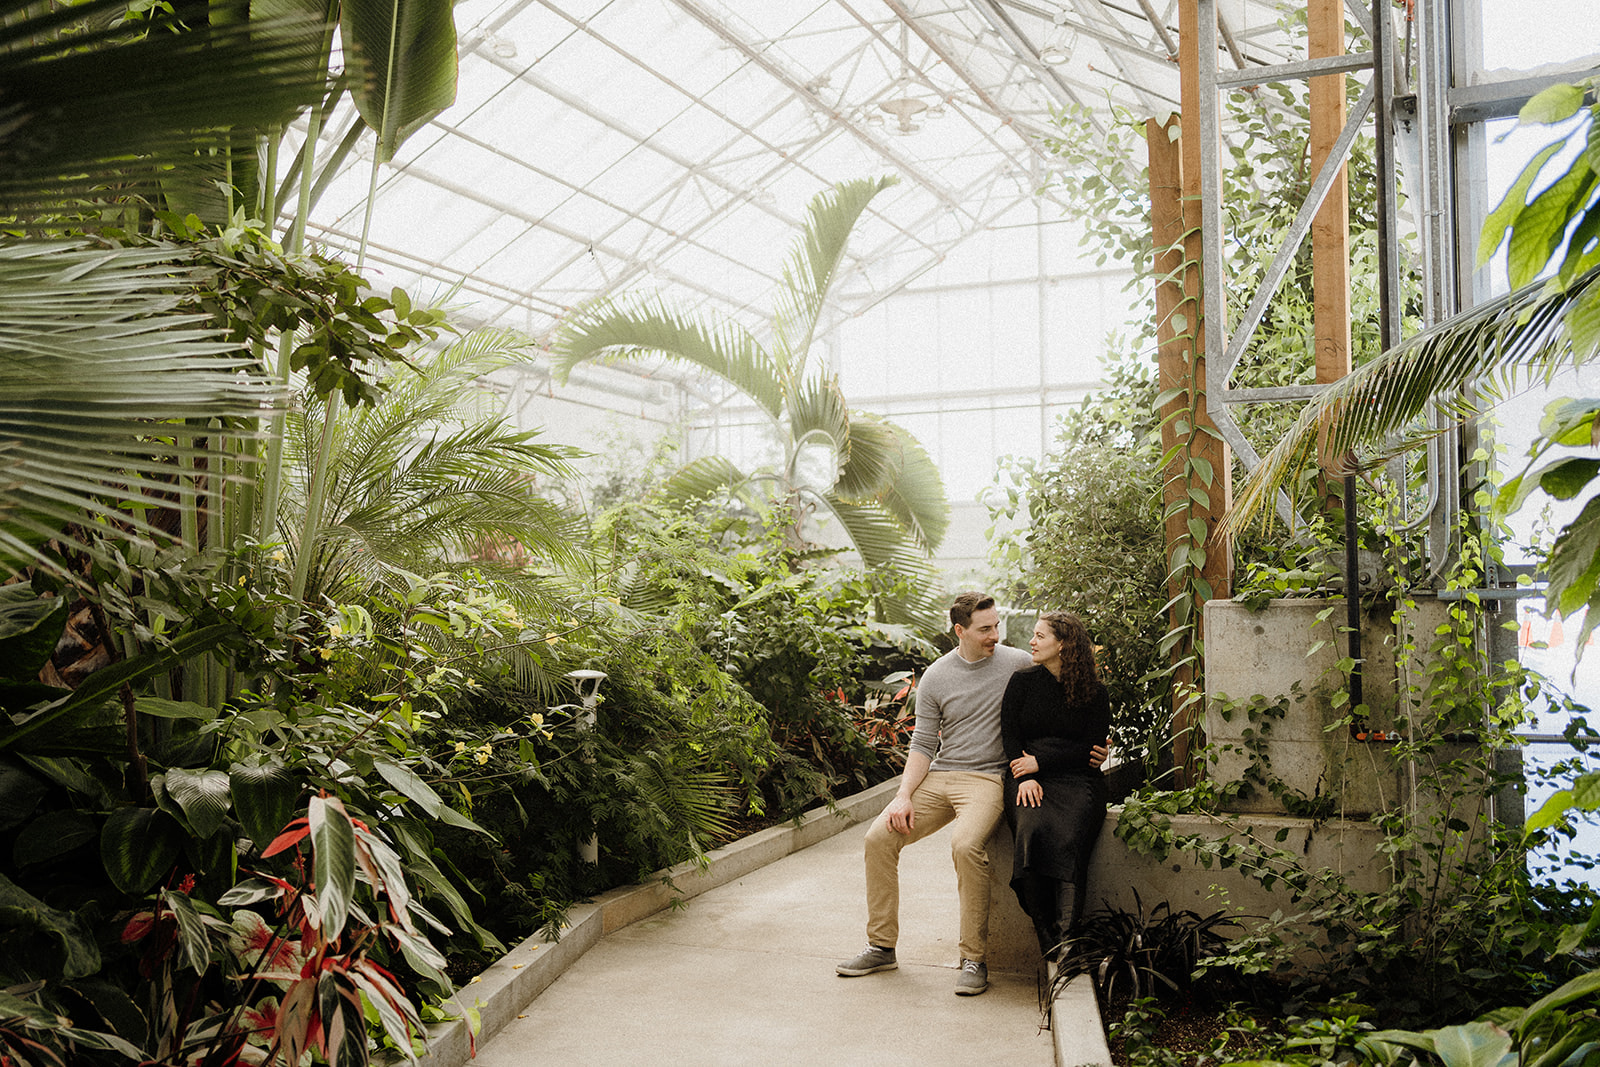 A man and a woman sitting down in a greenhouse.